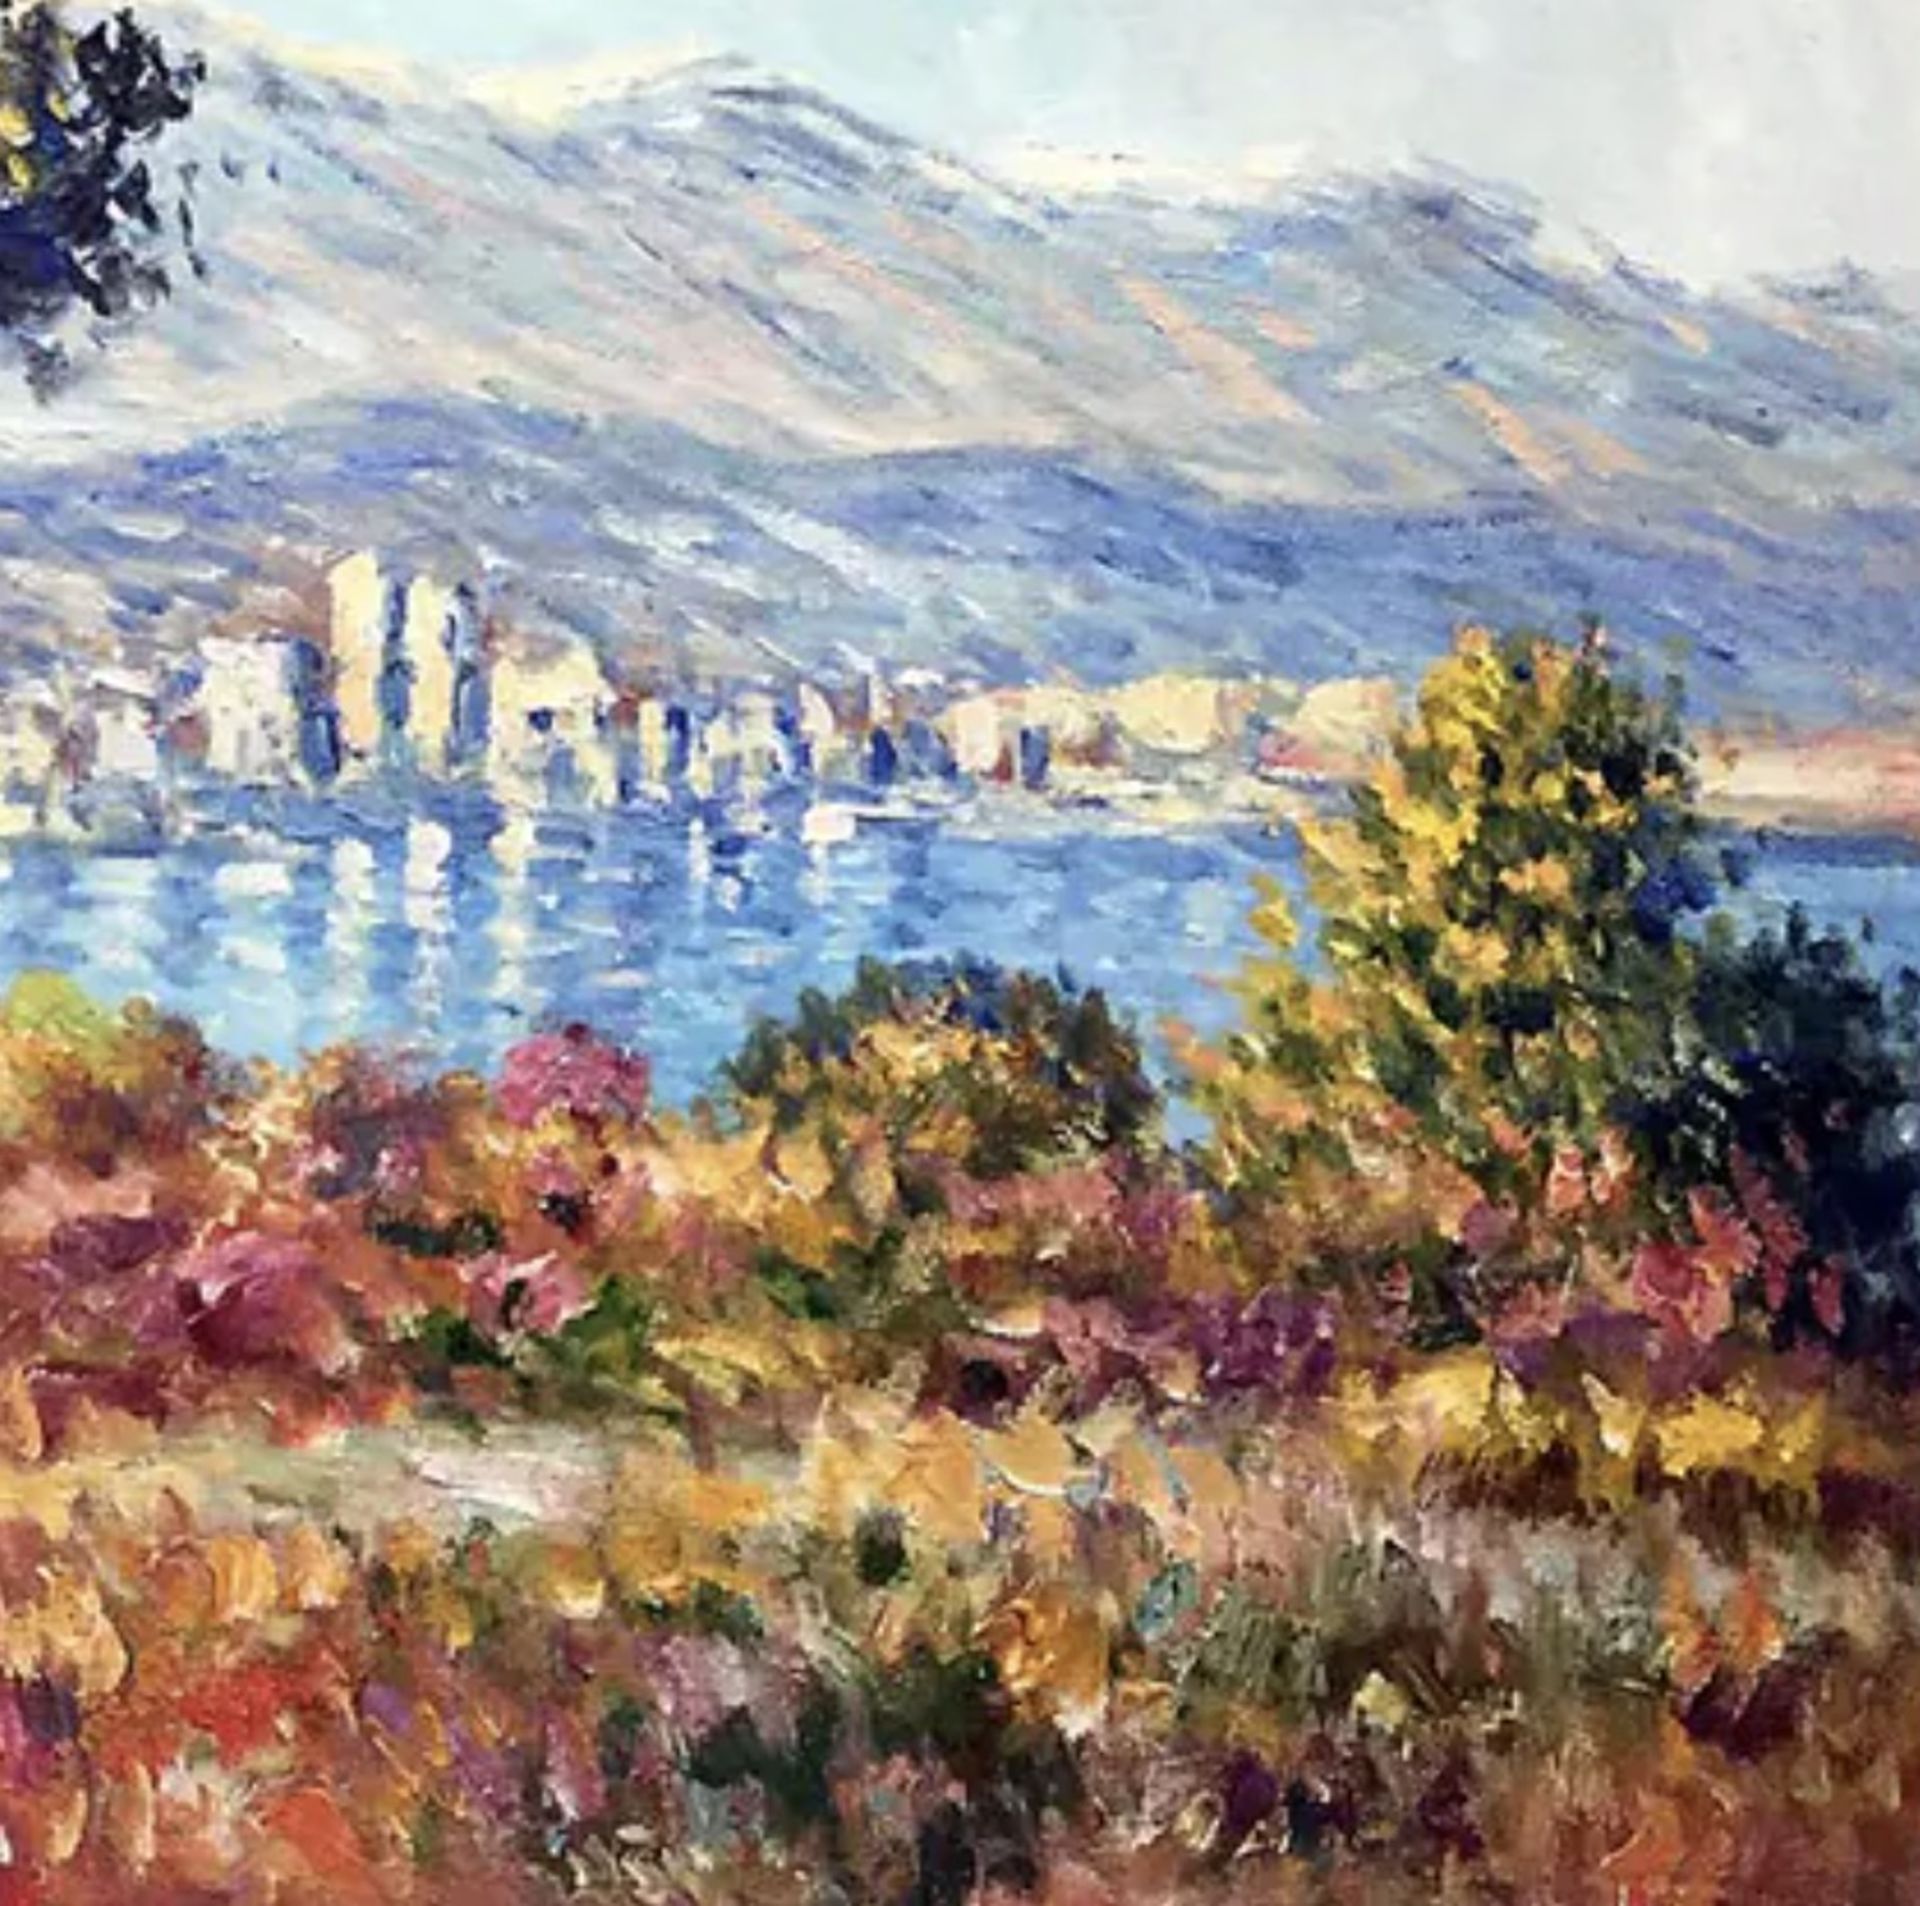 Claude Monet "Antibes, 1888" Oil Painting, After - Image 6 of 6